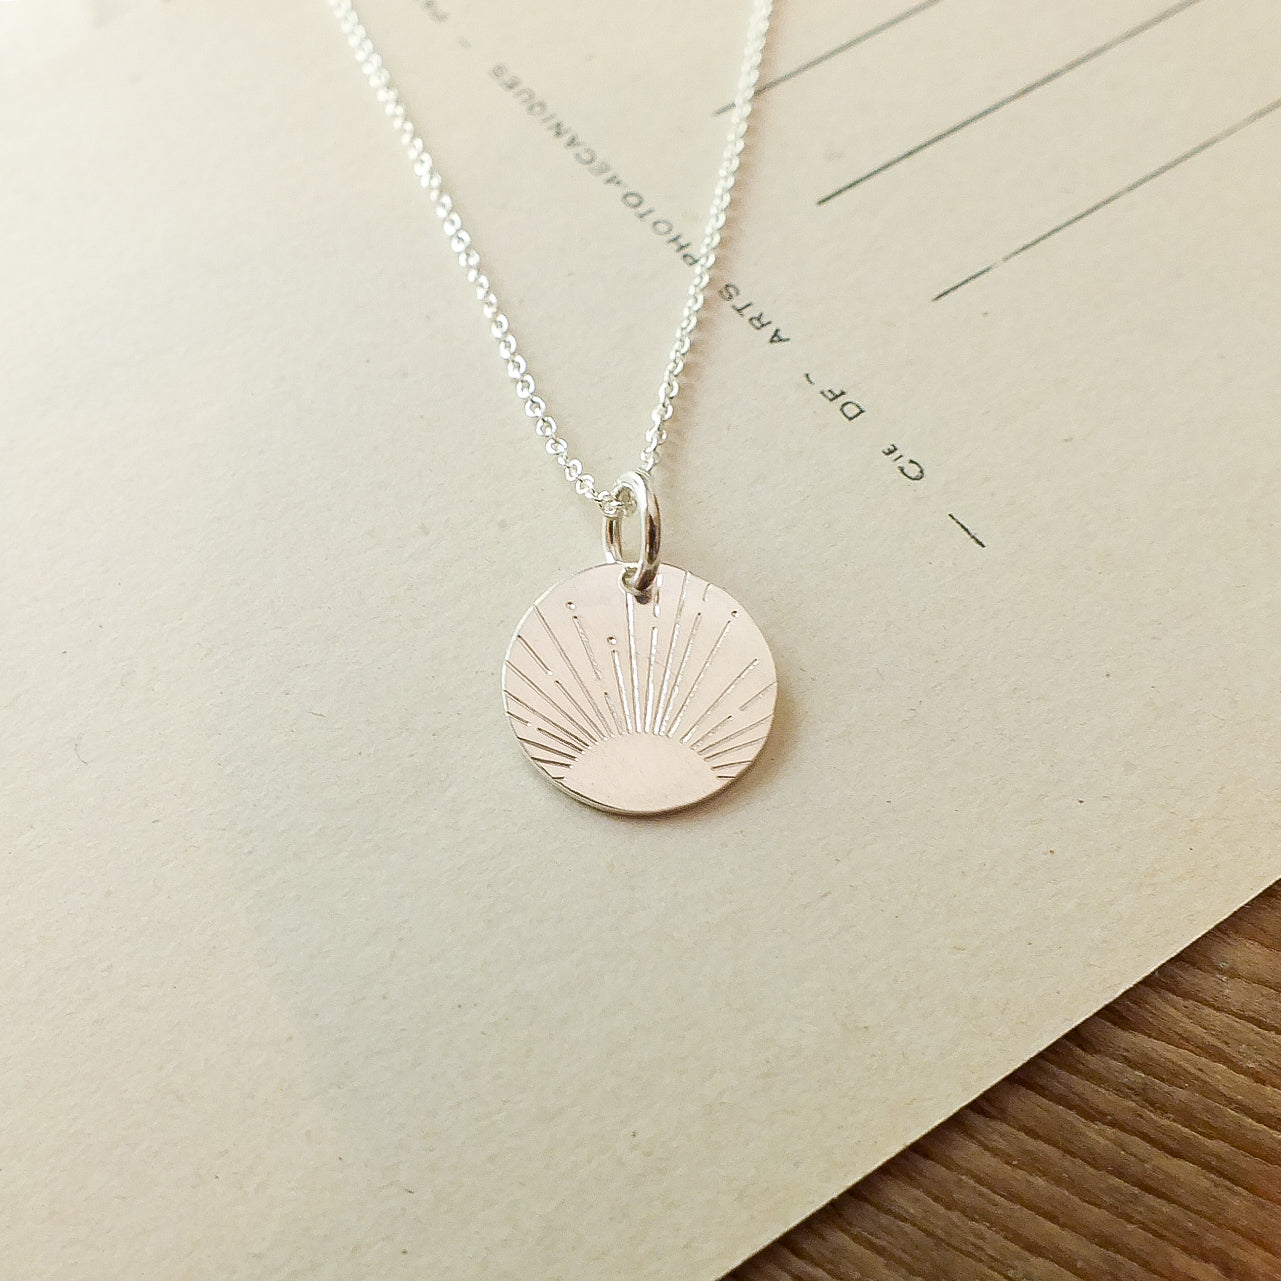 Becoming Jewelry&#39;s Irish Blessing Necklace with a sun charm design on a piece of paper.